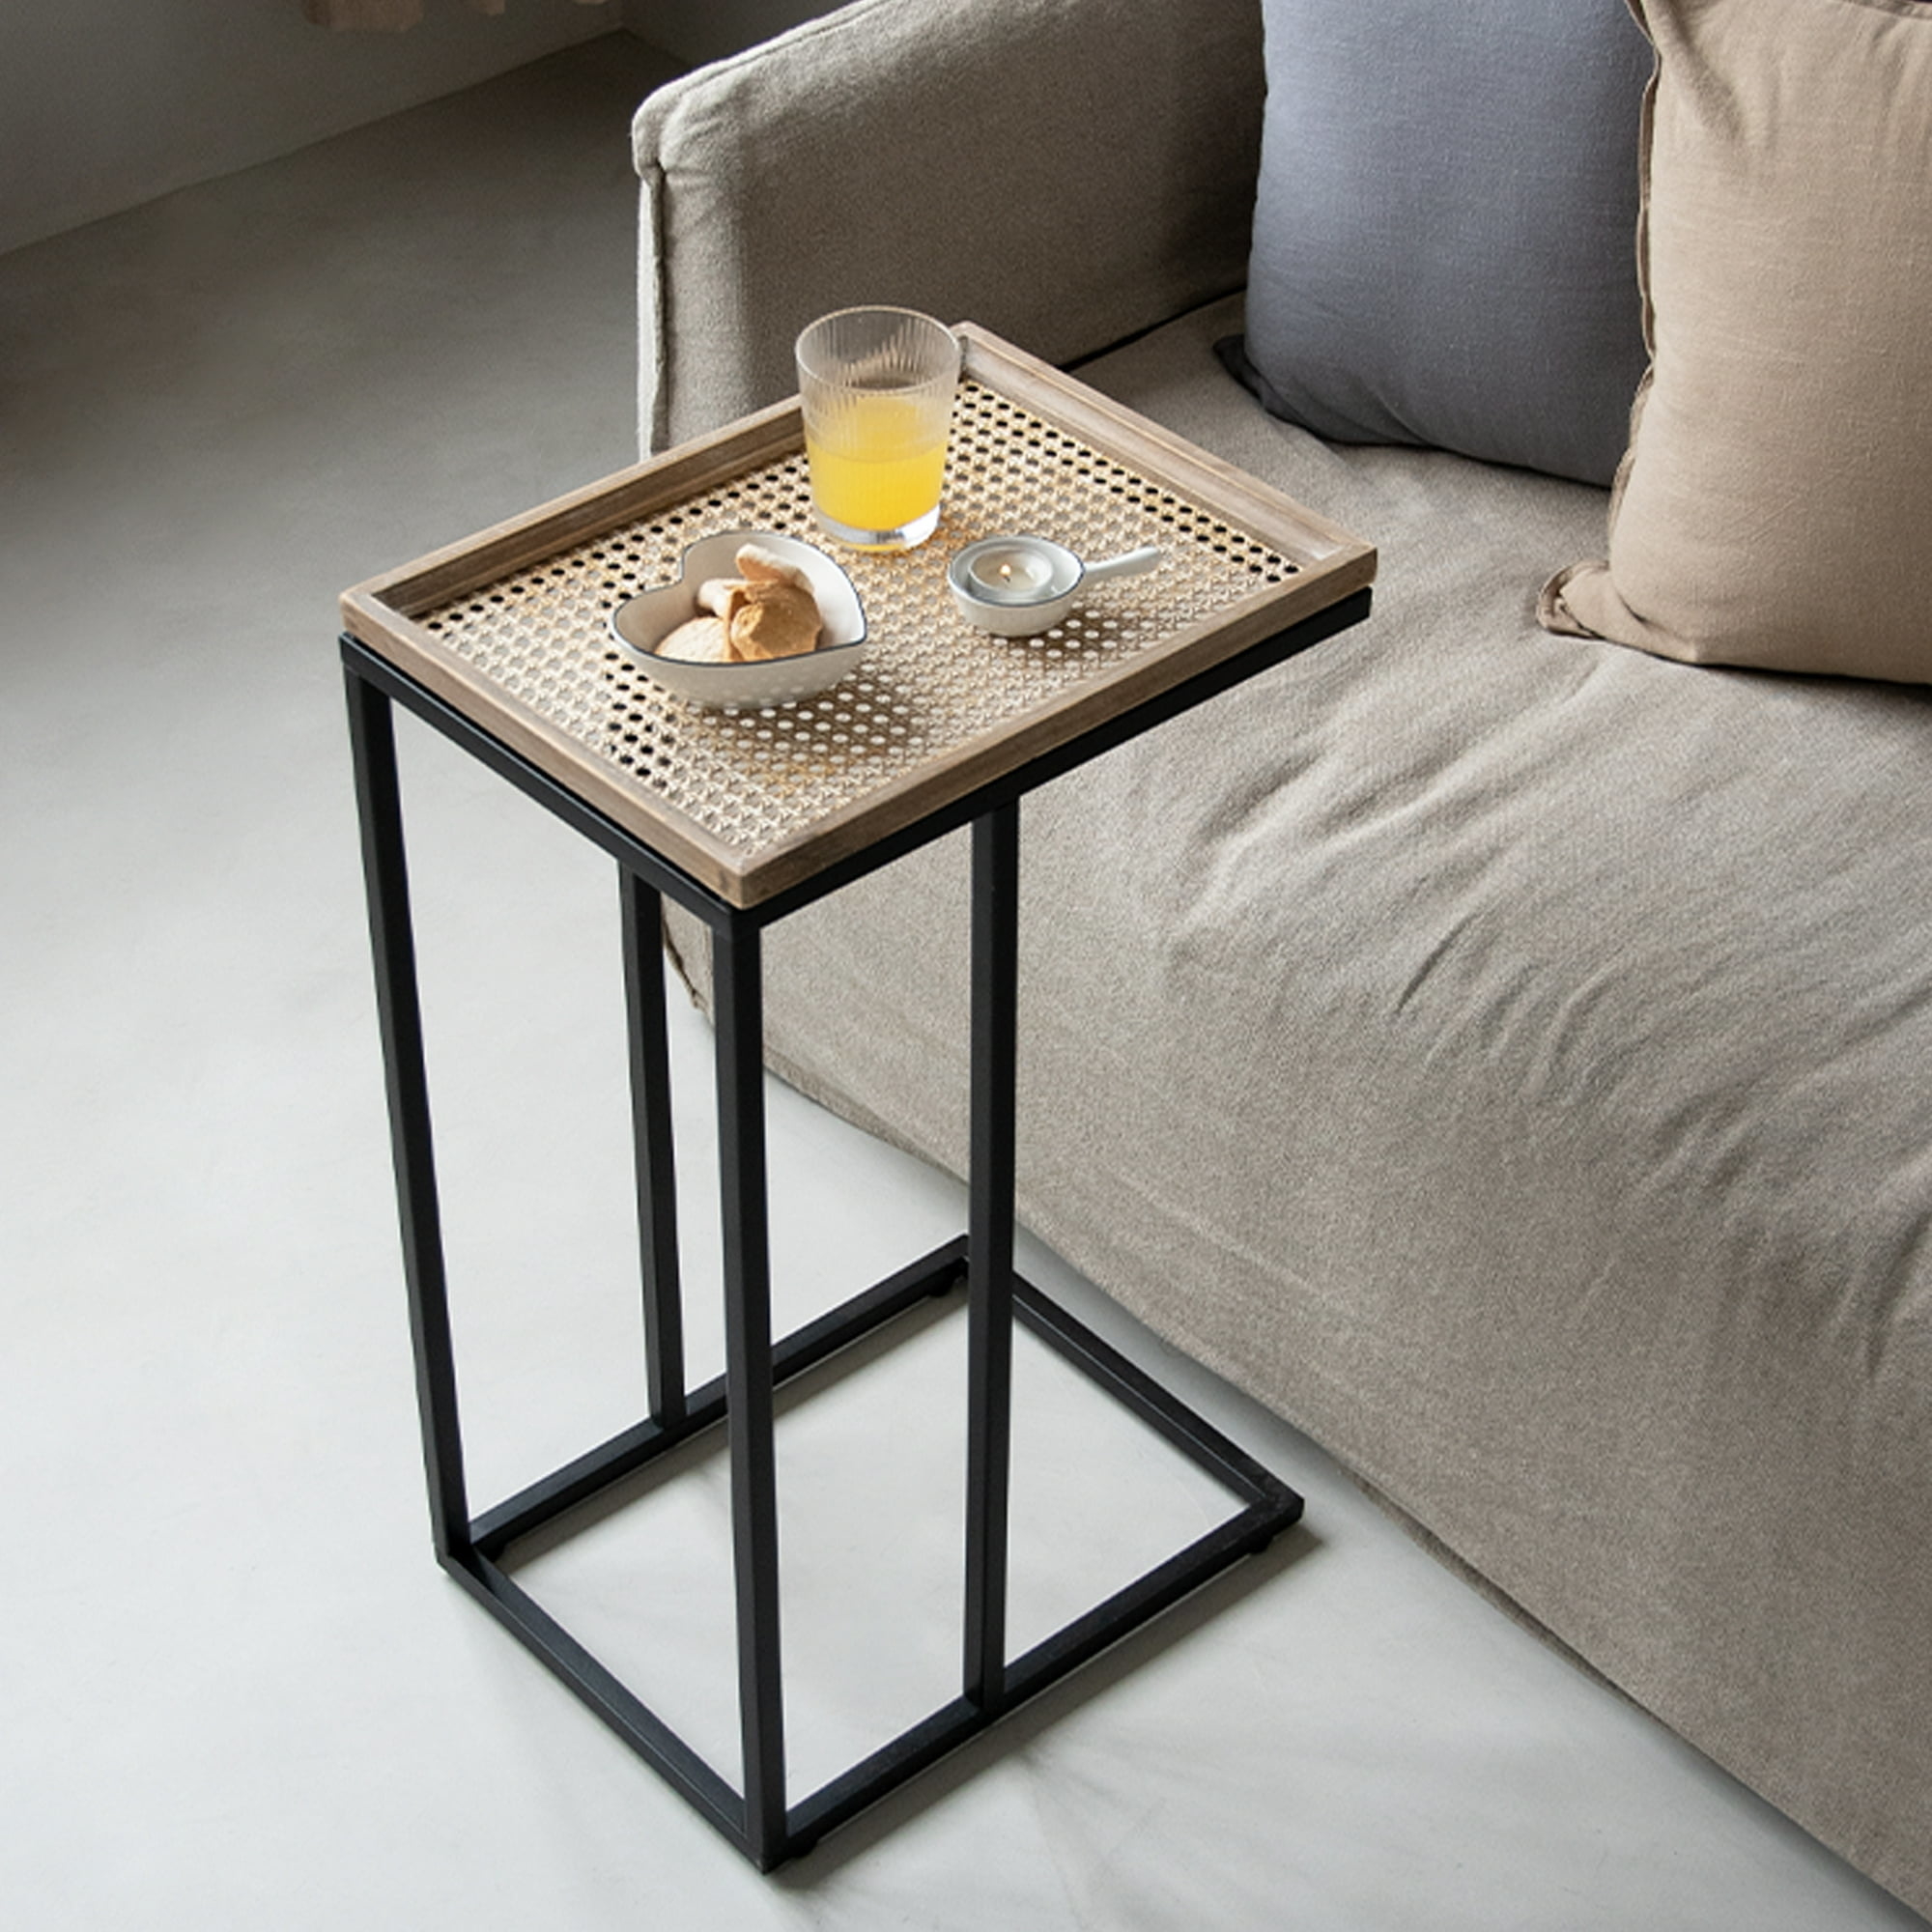 a black and brown end table with a wicker design holding juice and a small bowl of cookies